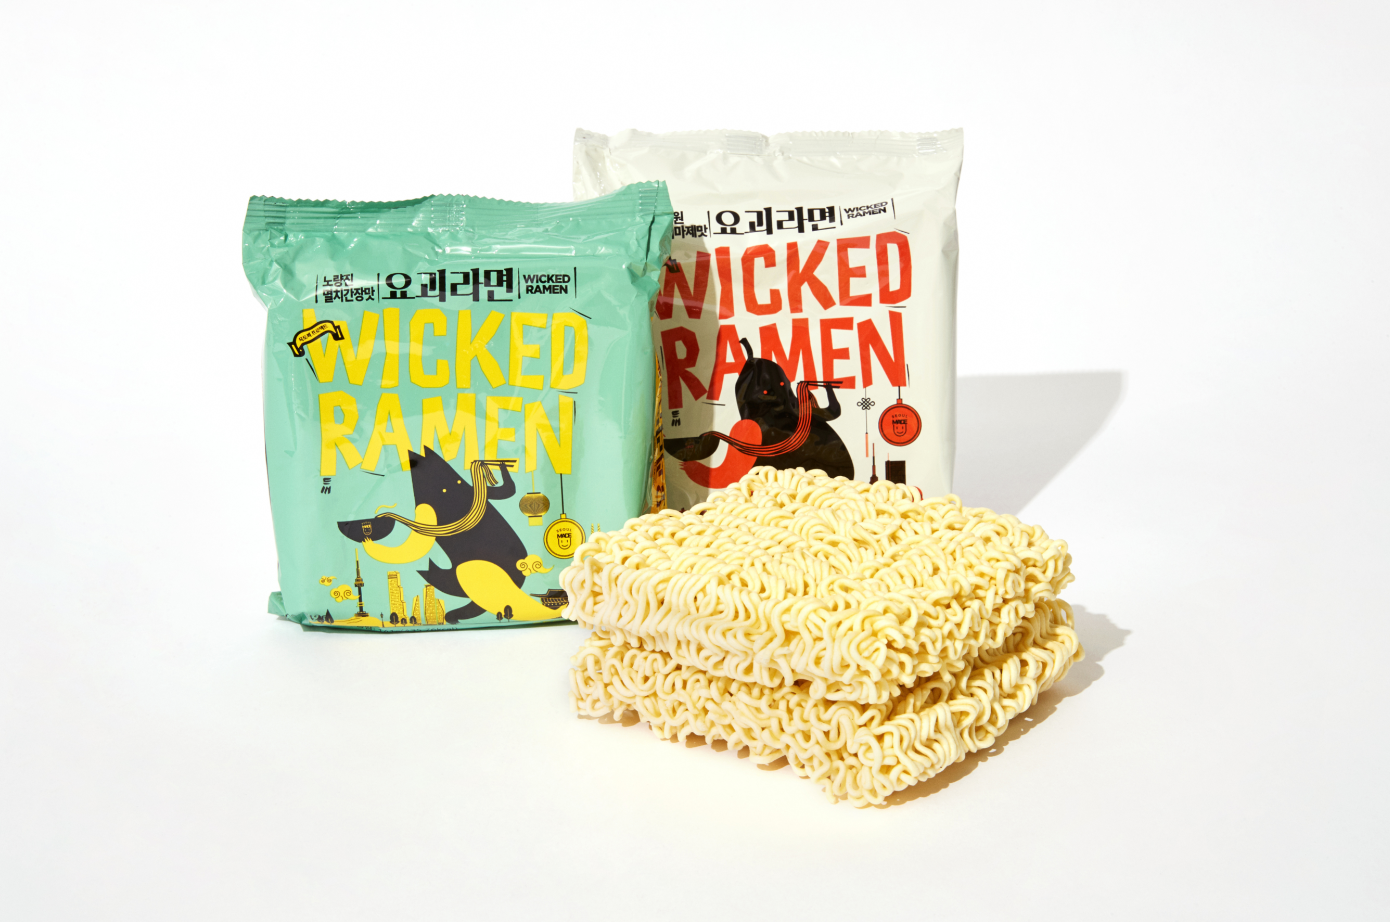 "SEOULMADE X Oktokkiproject collaboration ramen" Noryangjin Anchovy Soy flavor and Itaewon Sesame Maje flavor released